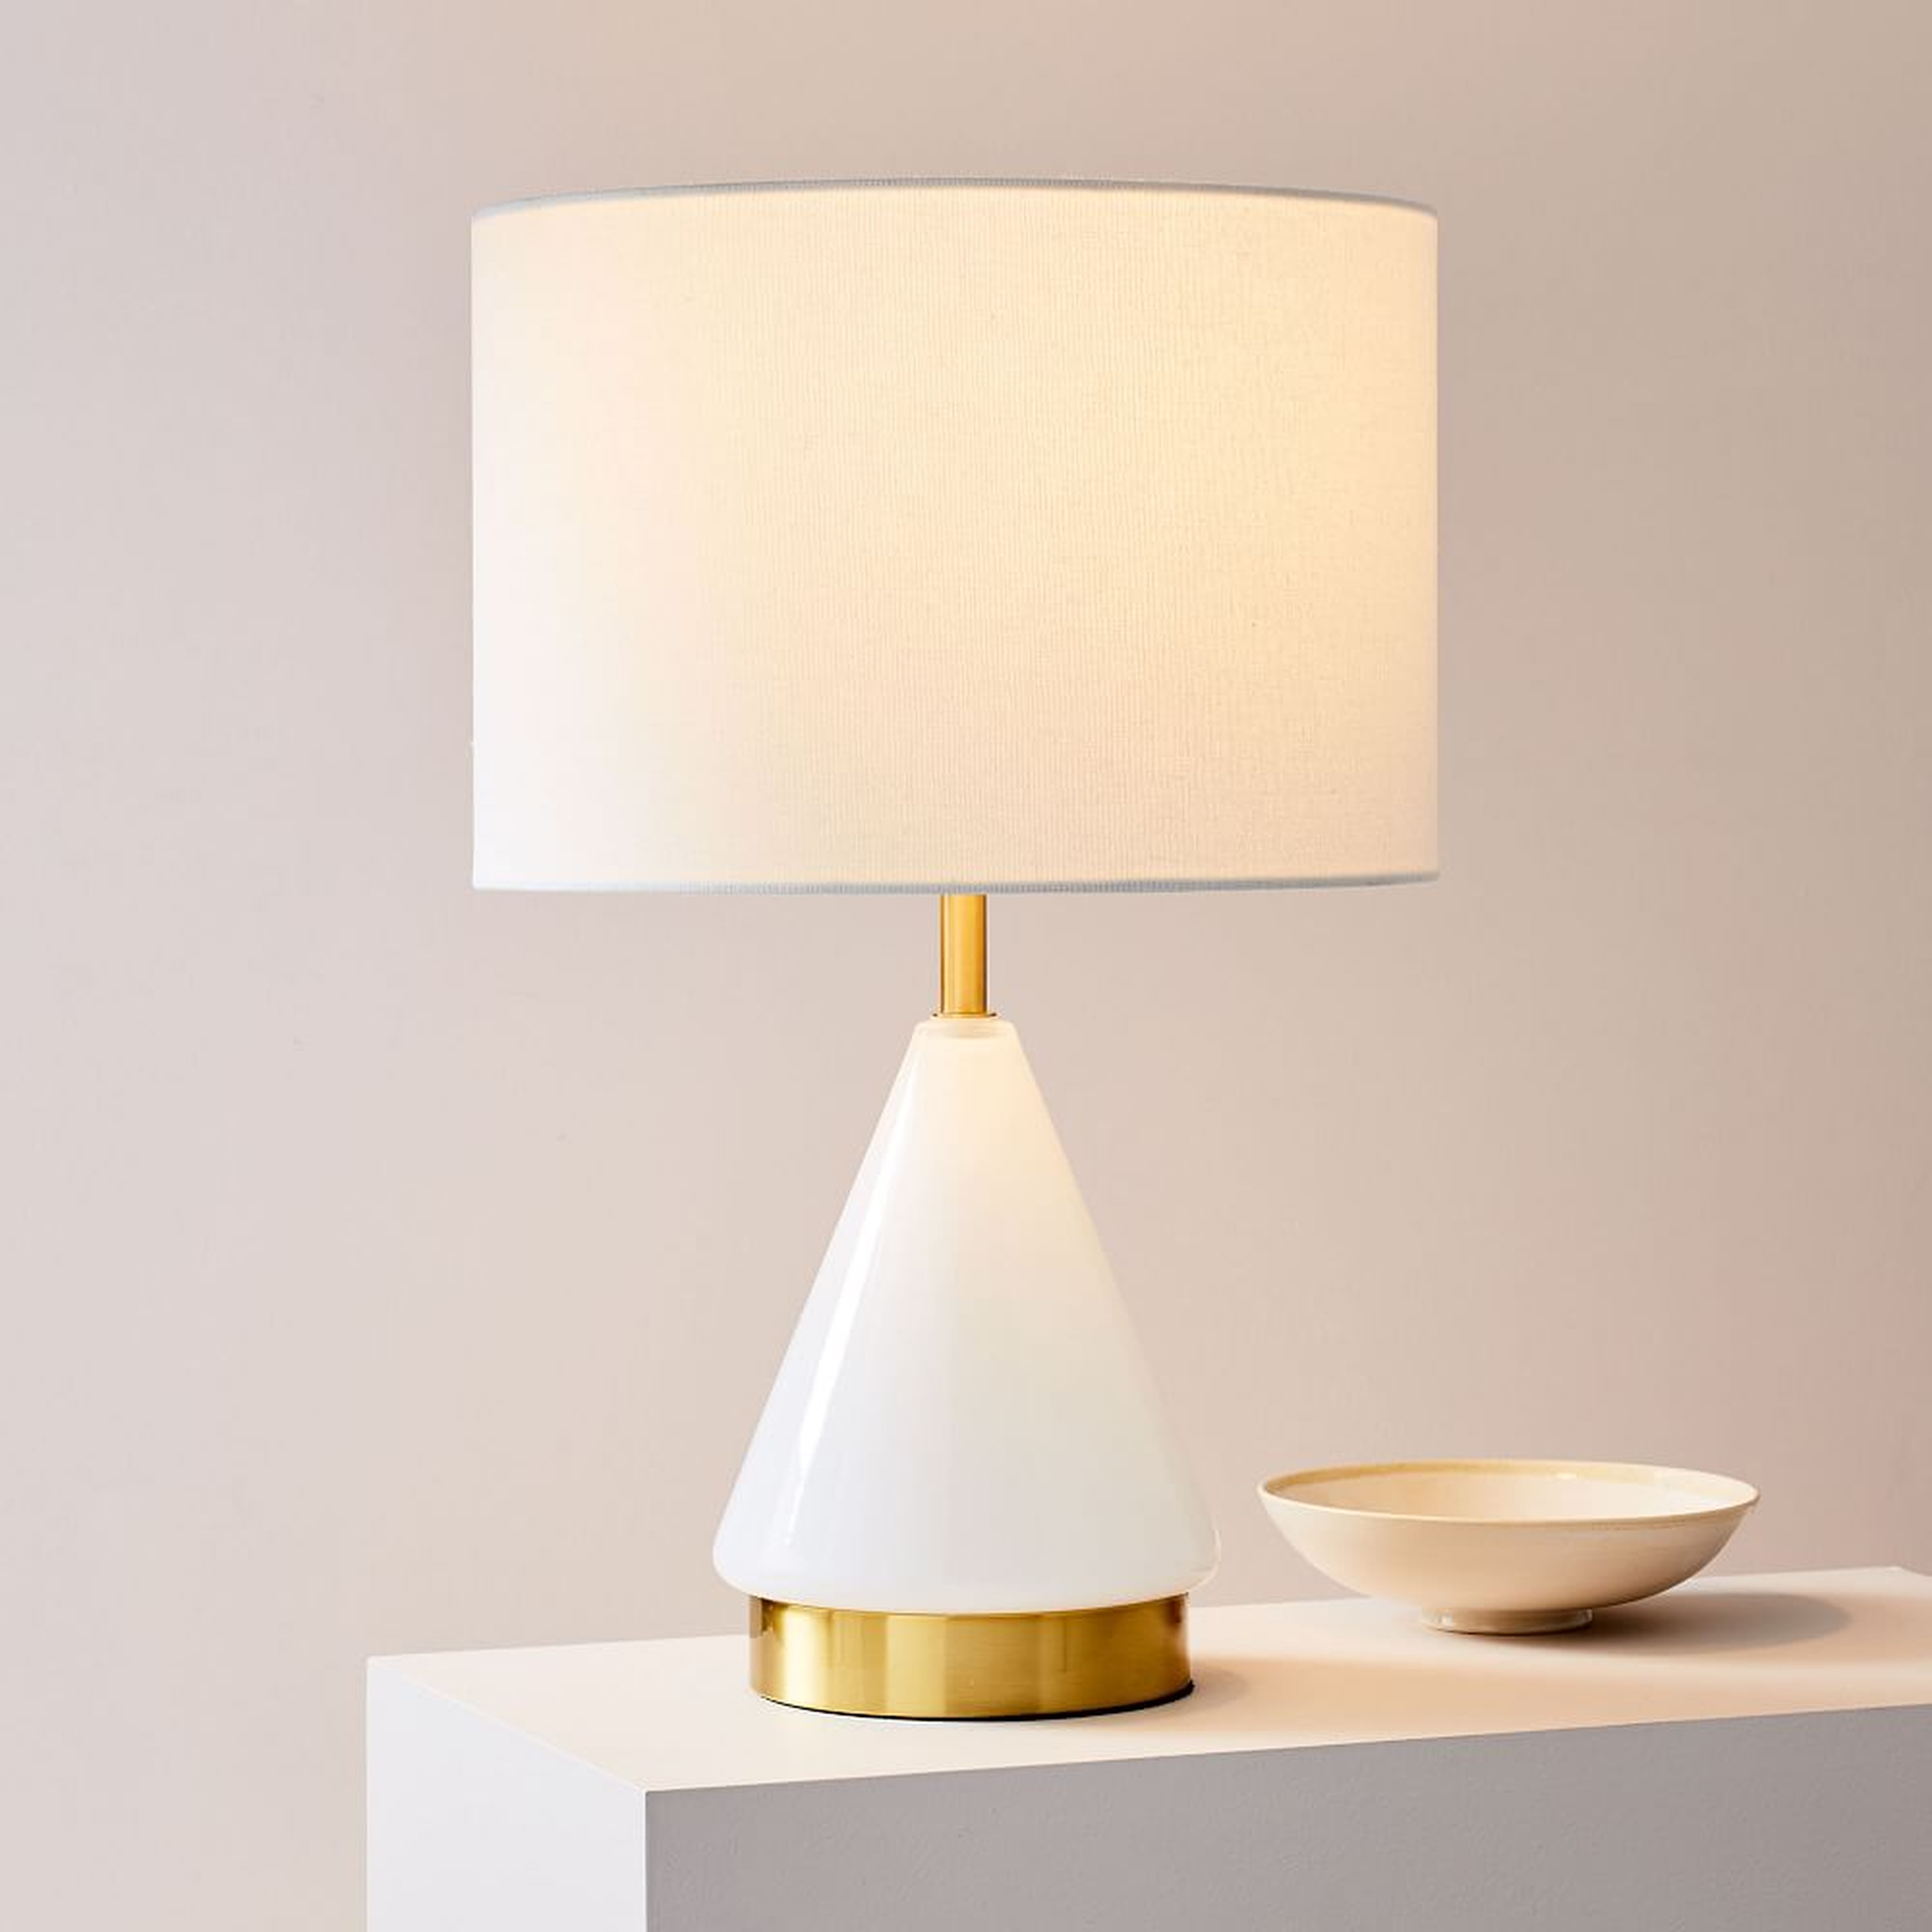 Metalized Glass Table Lamp + USB, Small, White, Antique Brass, Set of 2 - West Elm